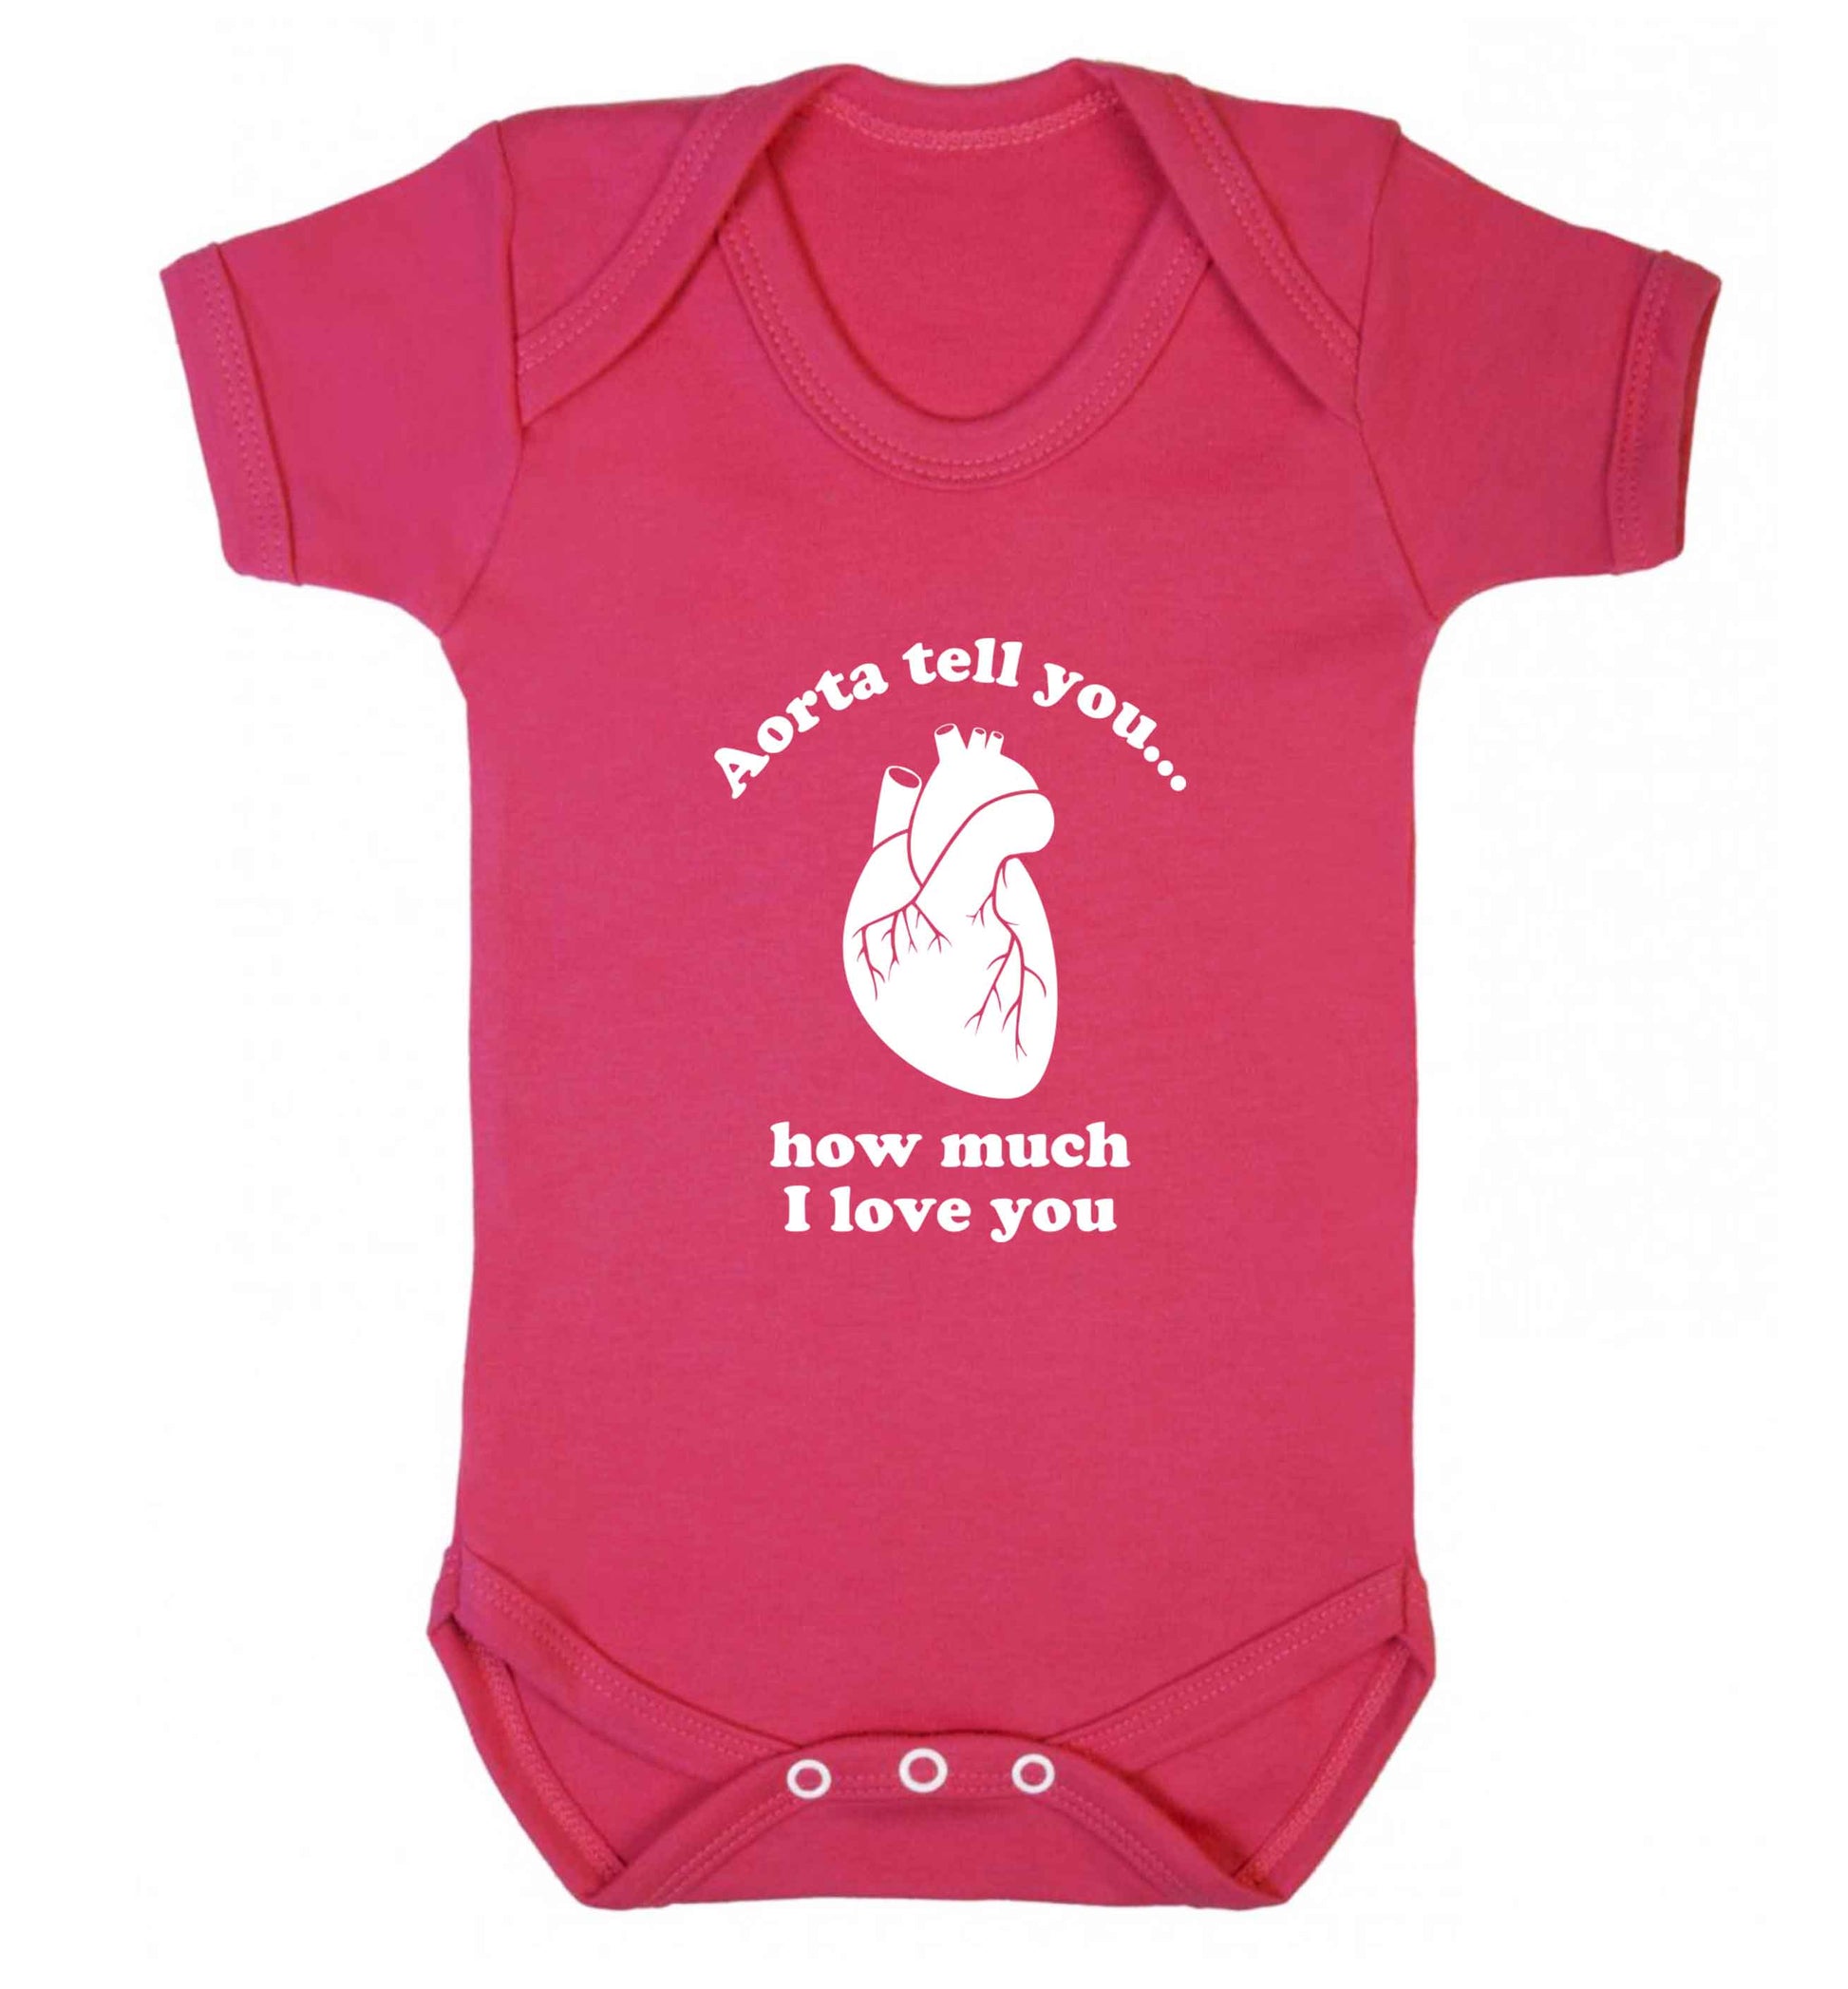 Aorta tell you how much I love you baby vest dark pink 18-24 months